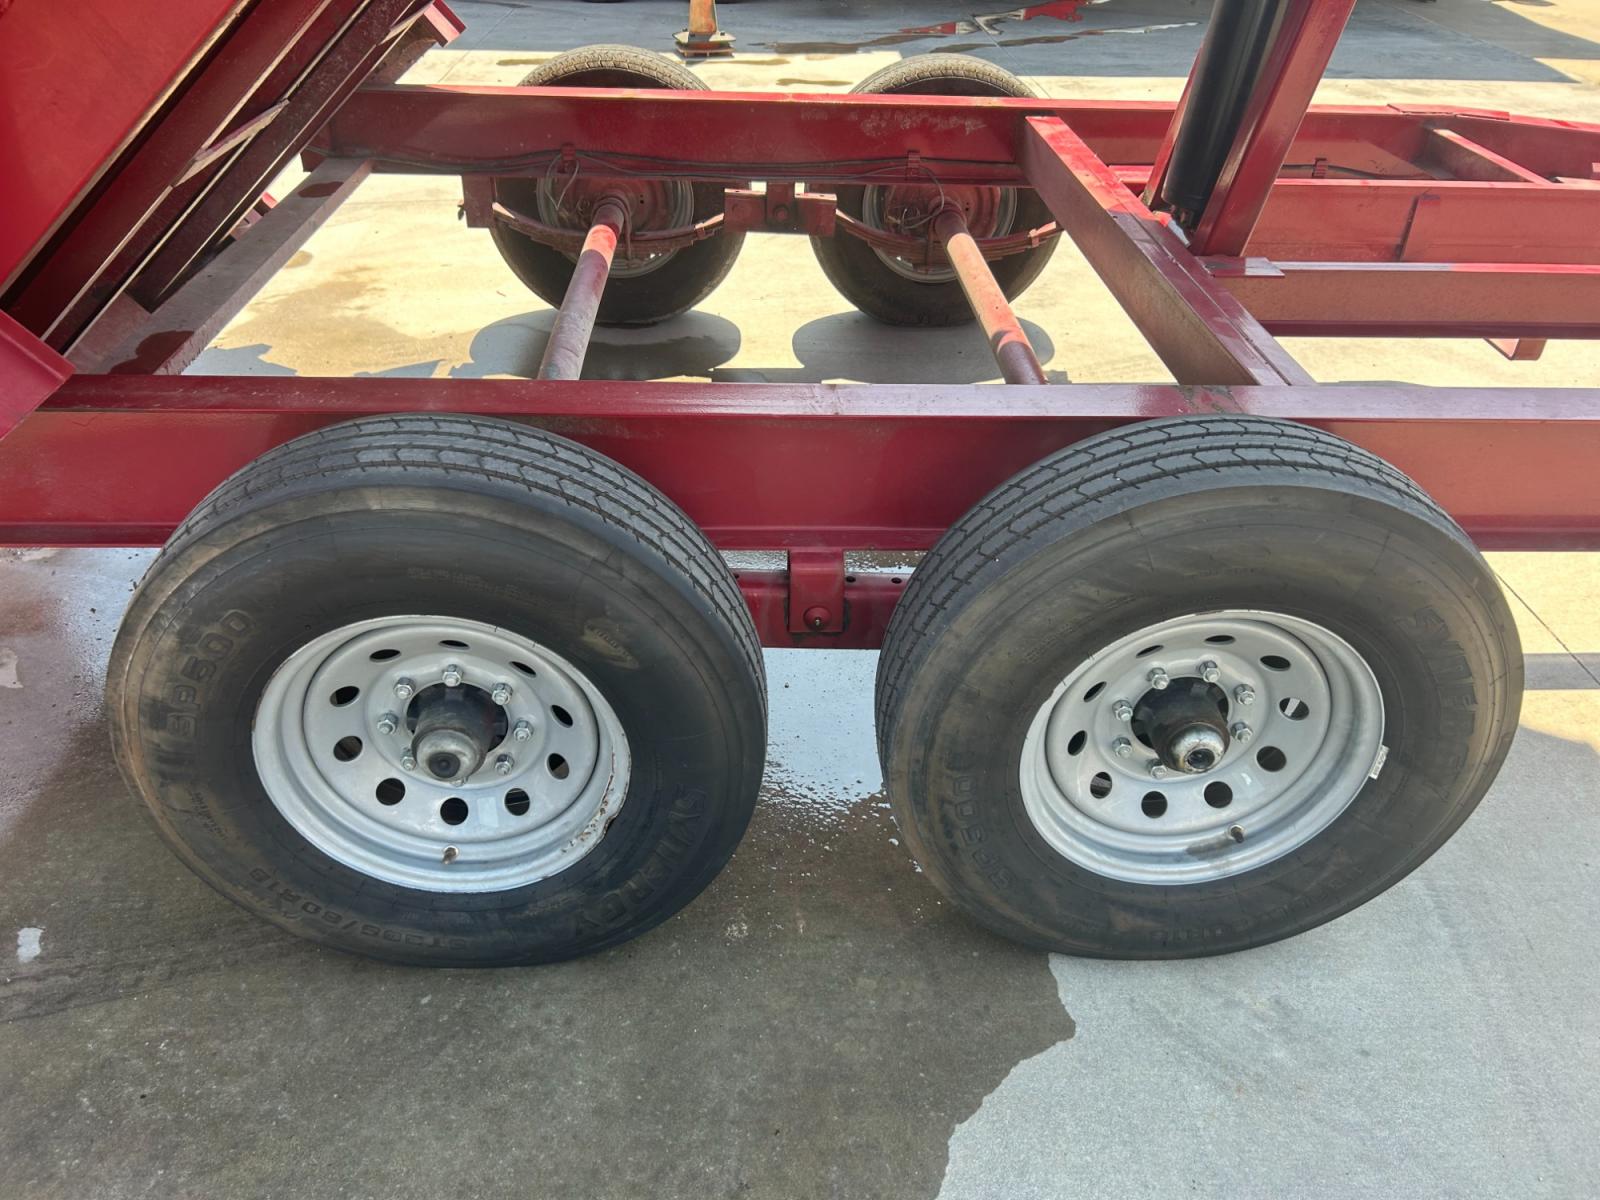 2022 RED EAST TEXAS TRAILER DUMPBED (58SBD1420NE) , located at 17760 Hwy 62, Morris, OK, 74445, 35.609104, -95.877060 - 2022 SILVERLINE TRAILER 83X14 FEATURES 2 7,000 LB DEXTER SPRING AXLES, 2 ELEC FSA BRAKES, COUPLER 2-5/16" ADJUSTABLE (6 HOLE), DIAMOND PLATE FENDERS, 16" CROSS-MEMBERS, 48" DUMP SIDES, 48" 3 WAY GATE, MESH ROLL TARP SYSTEM, JACK SPRING LOADED DROP LEG, 4 3'' D-RINGS, TOOL BOX IN TONGUE, SCISSOR HOIS - Photo #11